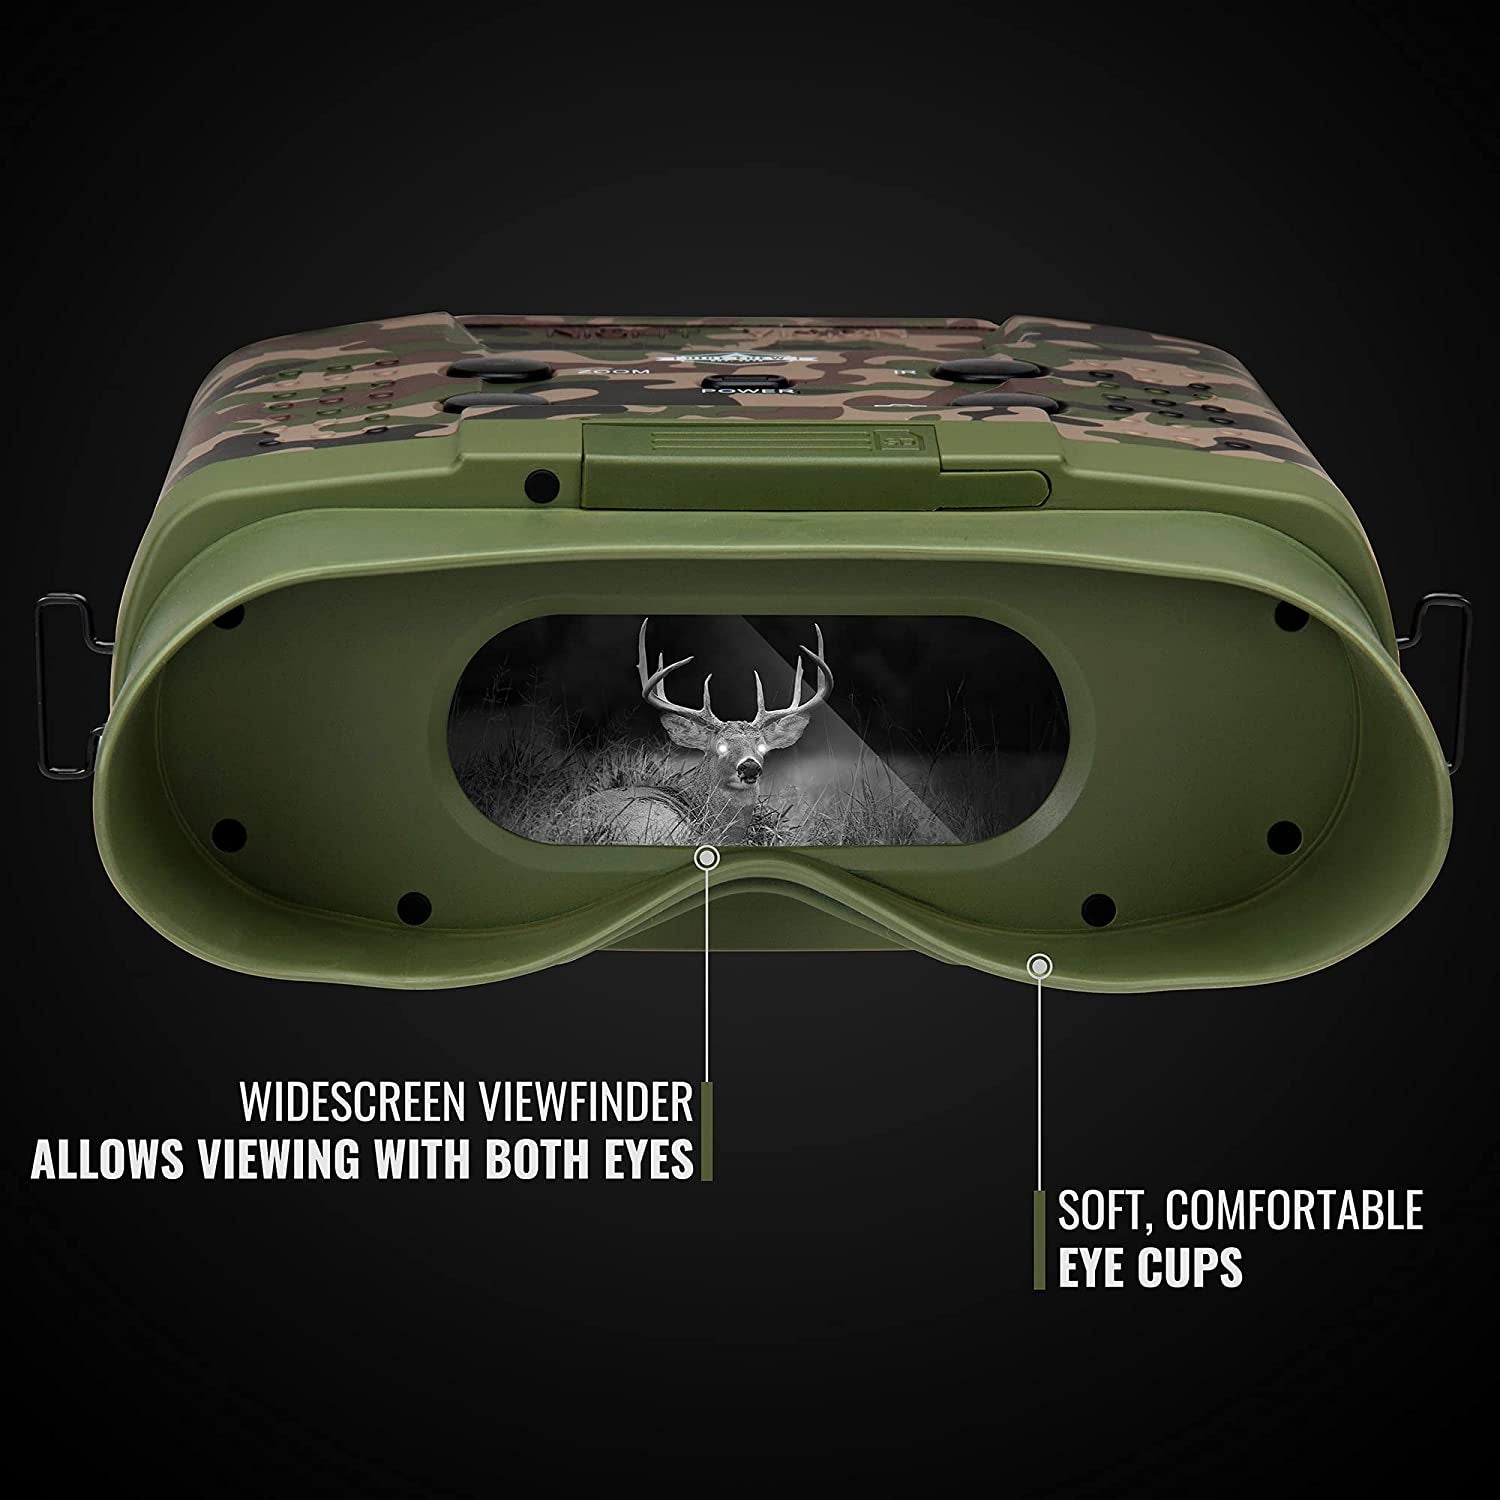 Camouflage Digital Night Vision Binoculars, Capture HD Photos & Videos, See Clear in 100% Total Darkness, Long Viewing Distance, Large Viewing LCD Screen, Infrared Goggles for Hunting